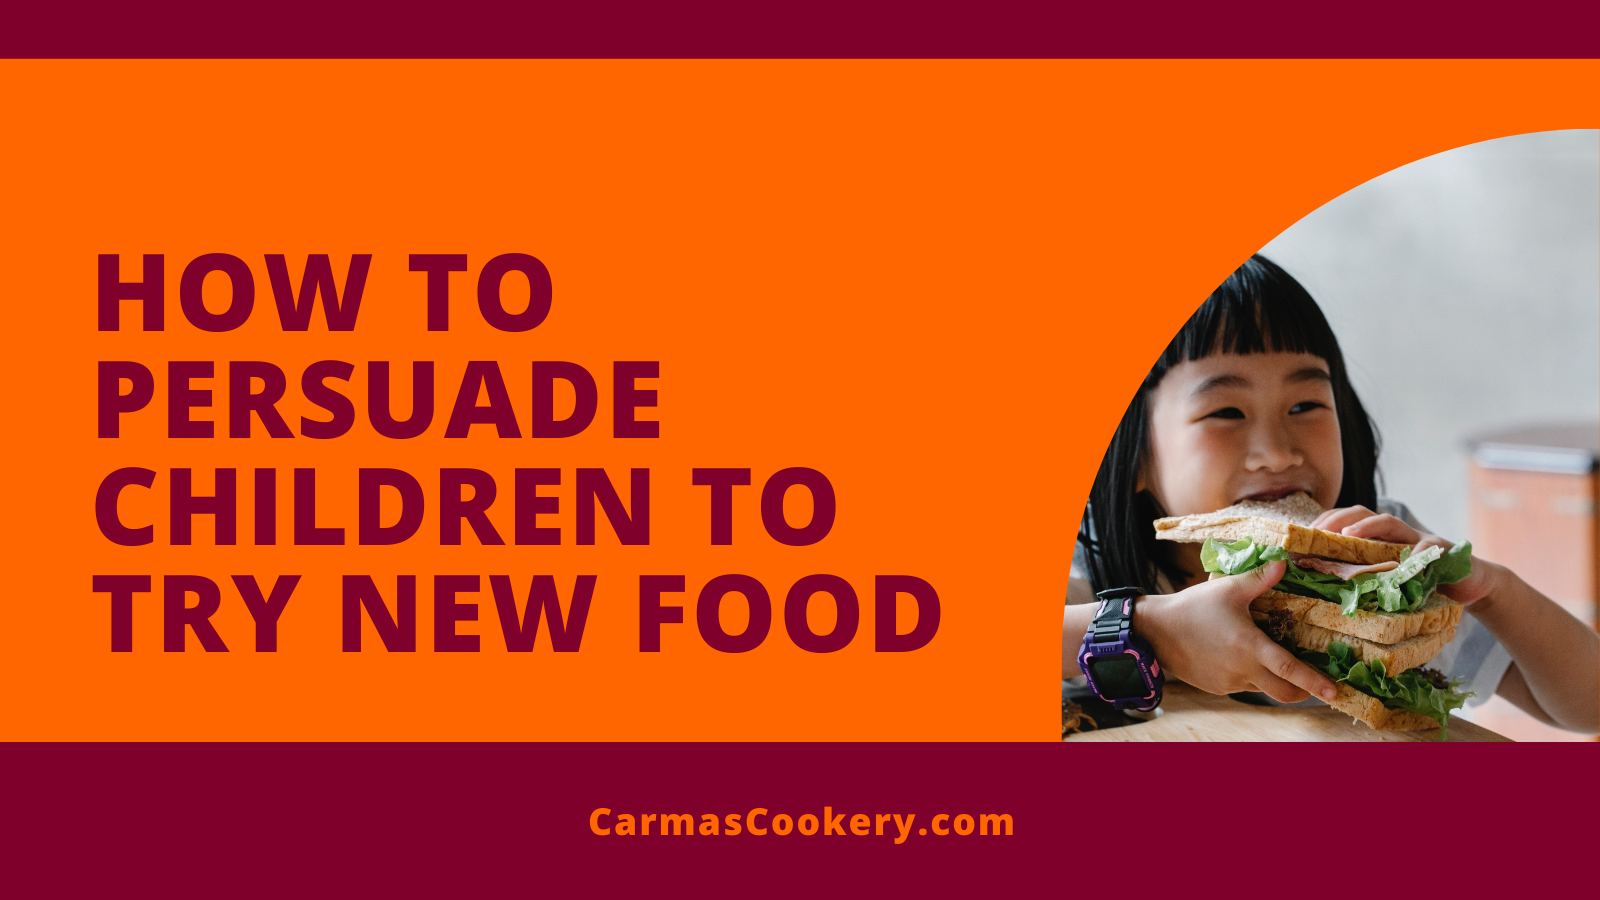 How To Persuade Children To Try New Food